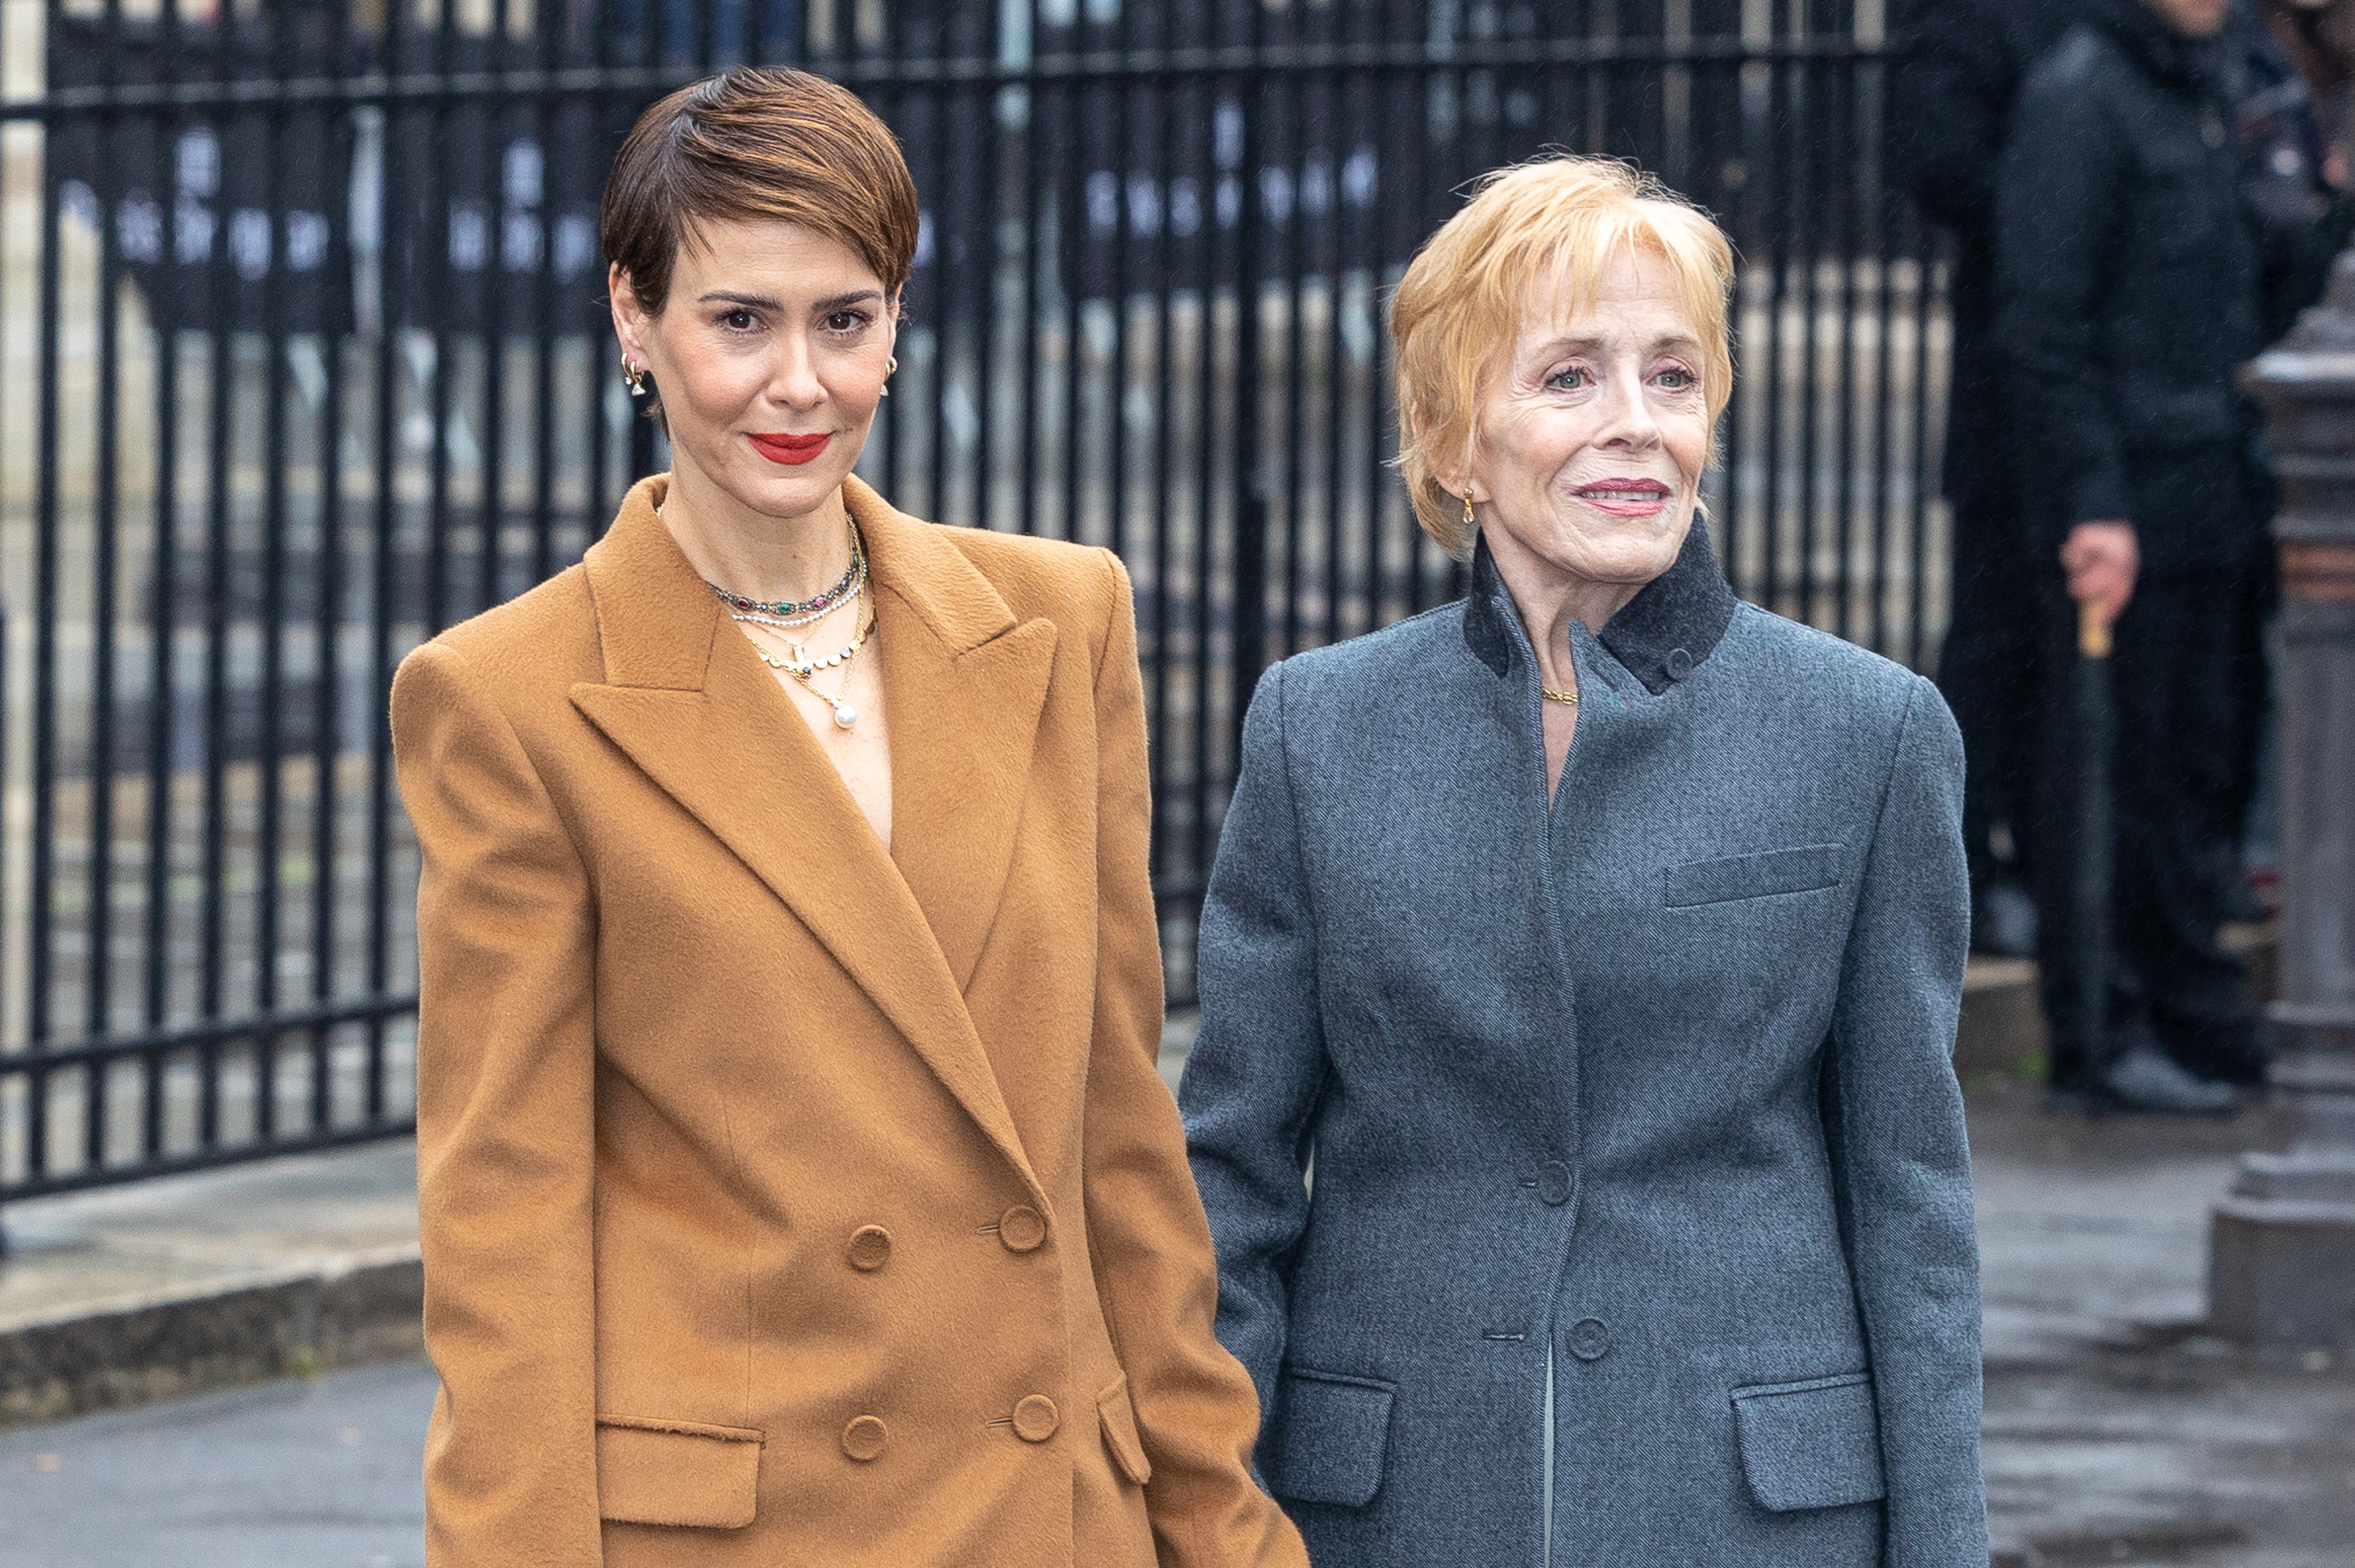 Sarah Paulson and Holland Taylor at the Fendi Couture Haute Couture Spring Summer 2023 show during Paris Fashion Week on January 26, 2023. | Source: Getty Images